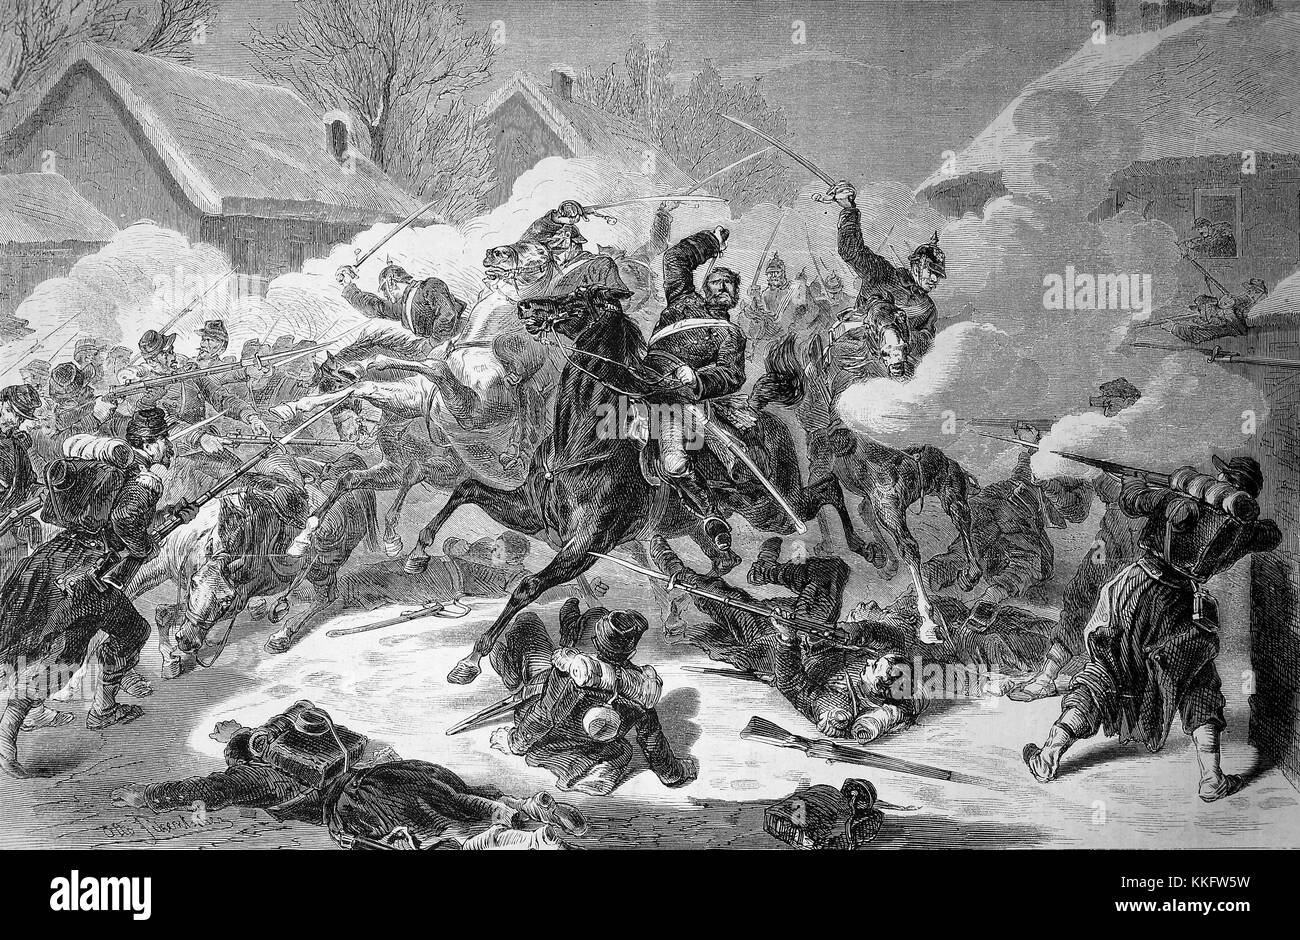 Battle of La Force on January 17, death of the First Lieutenant of Trotha from the Magdeburg Dragoon Regiment, France, Franco-German War 1870/71, Franco-Prussian War or Franco-German War, War of 1870, a conflict between the Second French Empire of Napoleon III and the German states of the North German Confederation led by the Kingdom of Prussia, Digital improved reproduction of an original woodcut Stock Photo